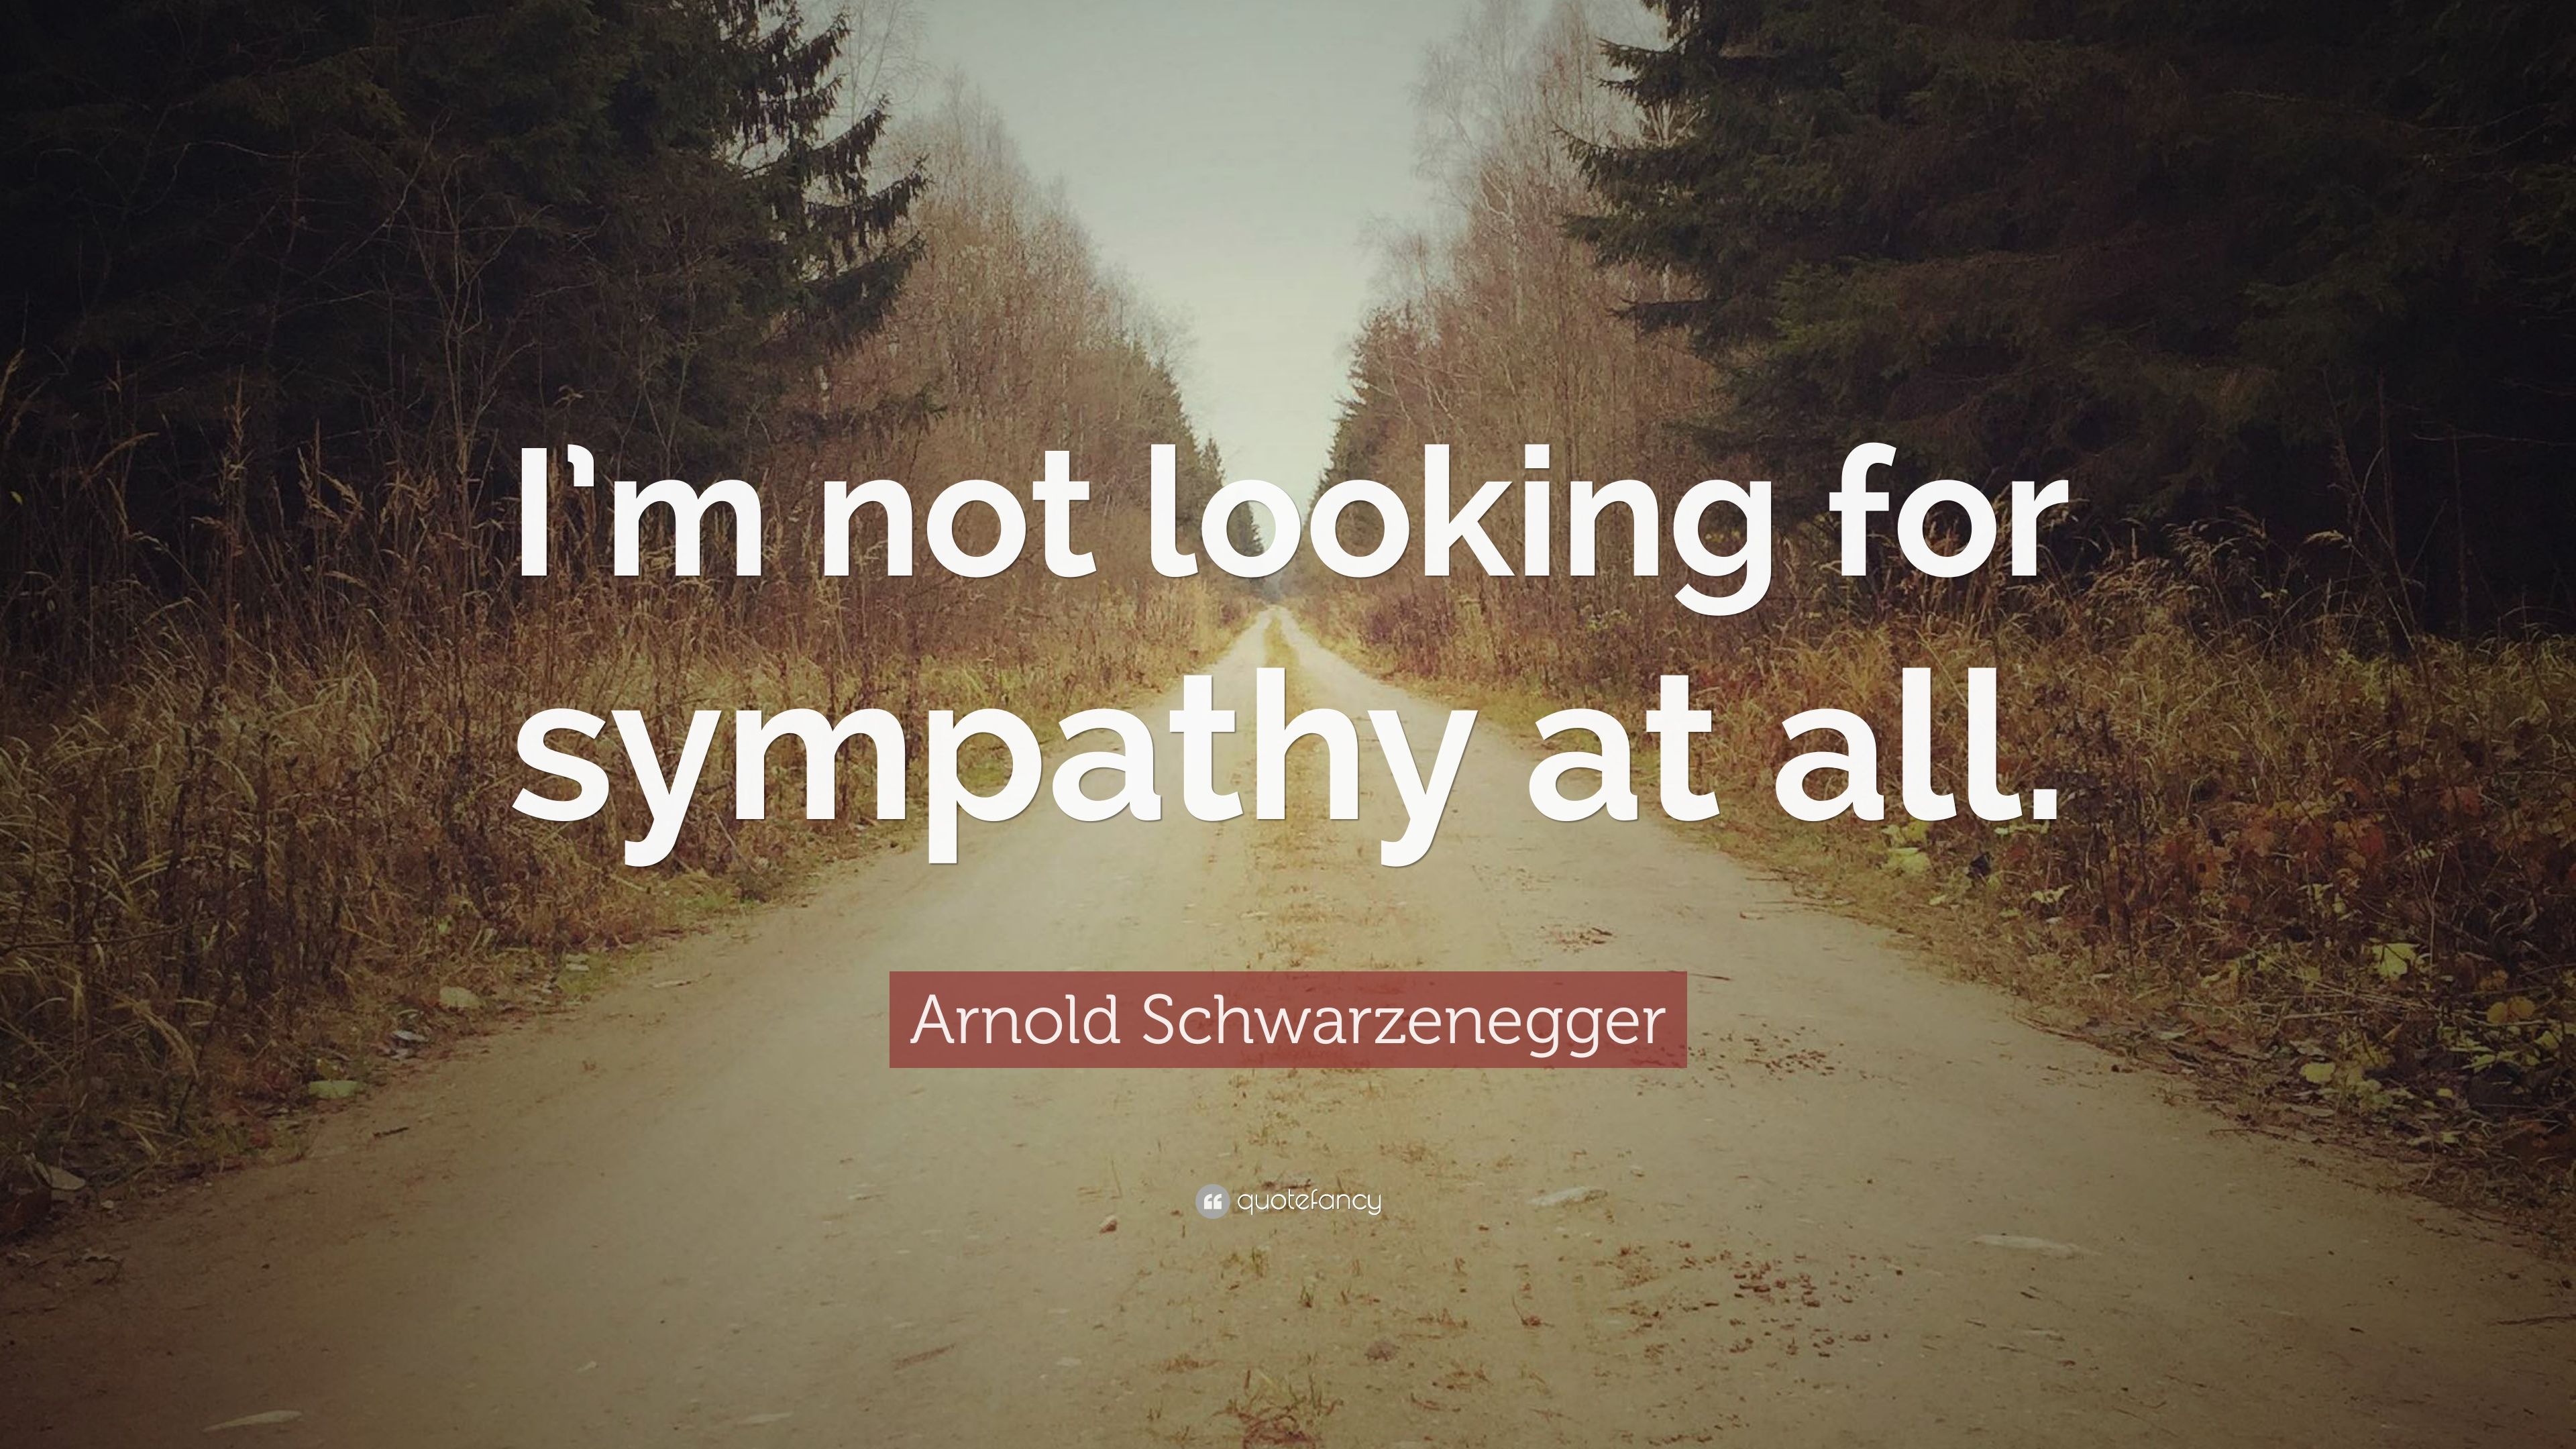 Arnold Schwarzenegger Quote: “I'm not looking for sympathy at all.” (12 wallpaper)